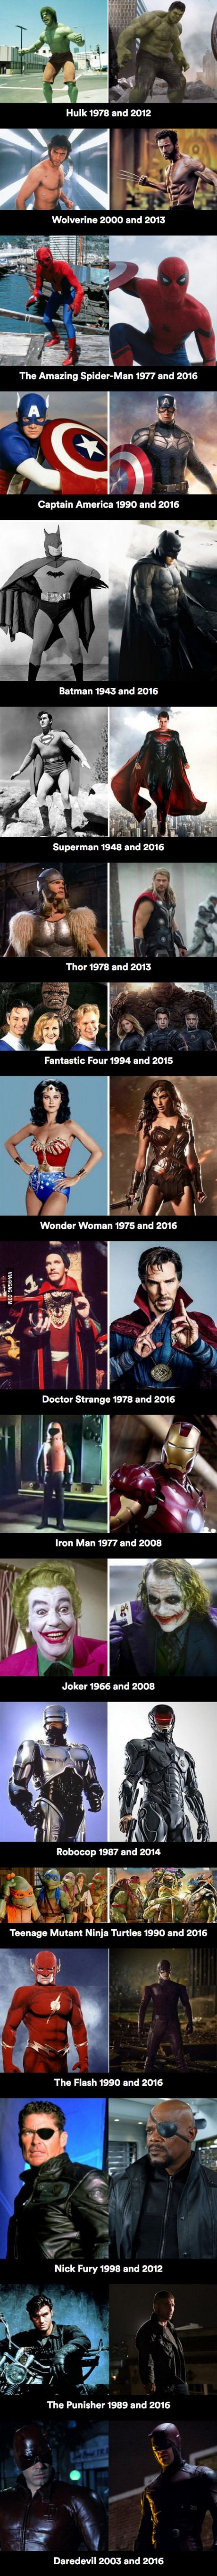 Superheroes Then v Now